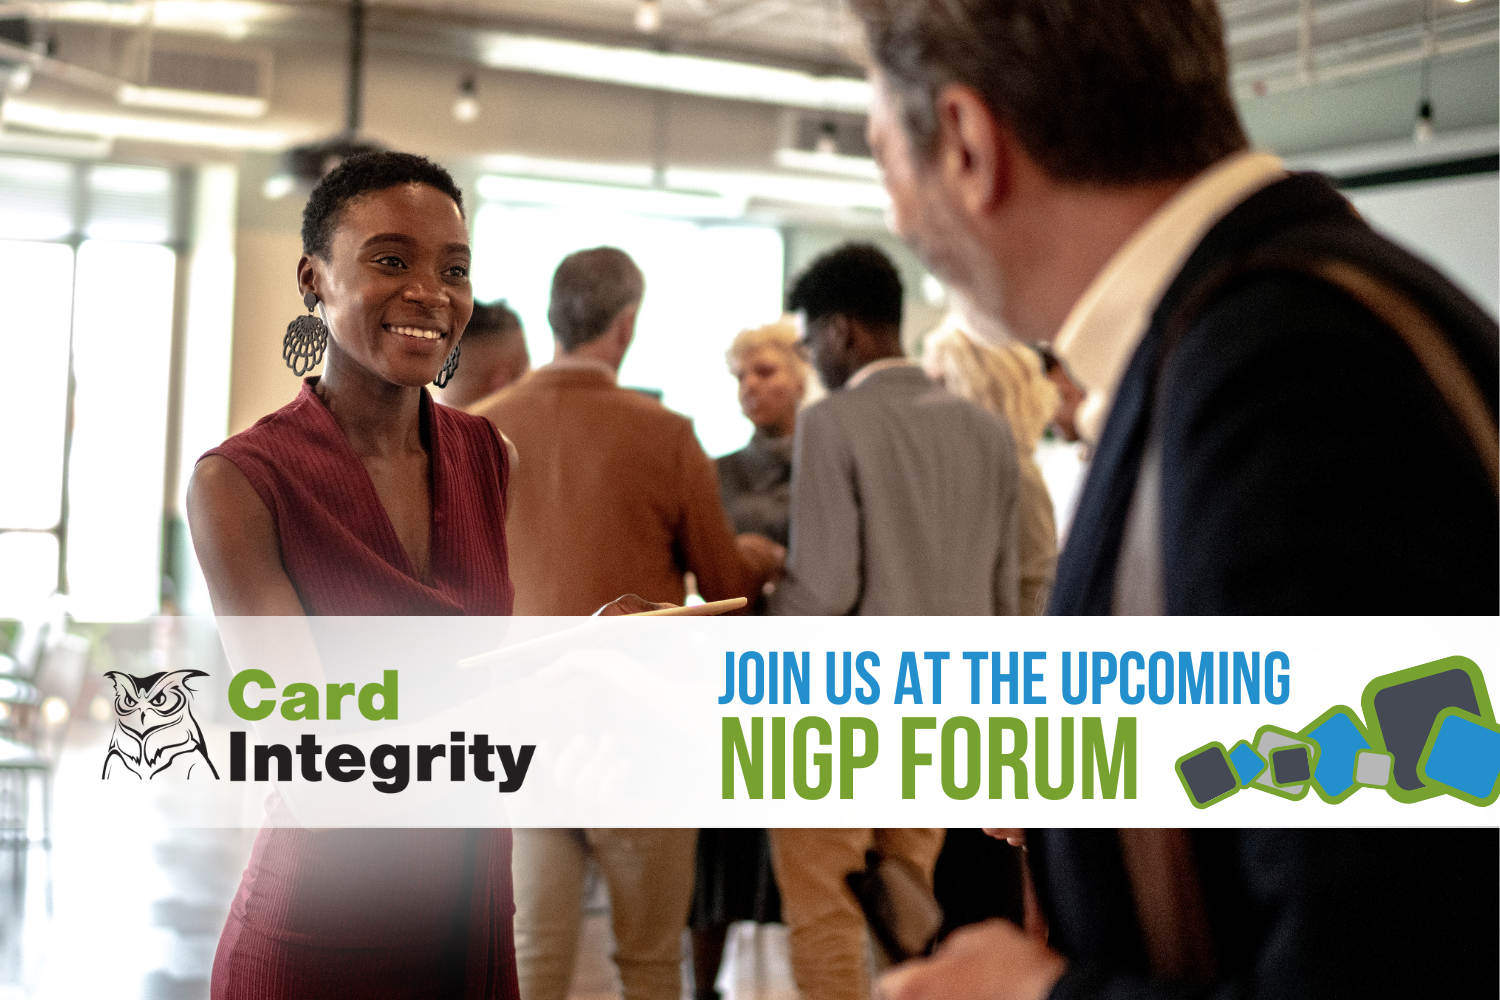 Join Us at the NIGP Forum! Card Integrity